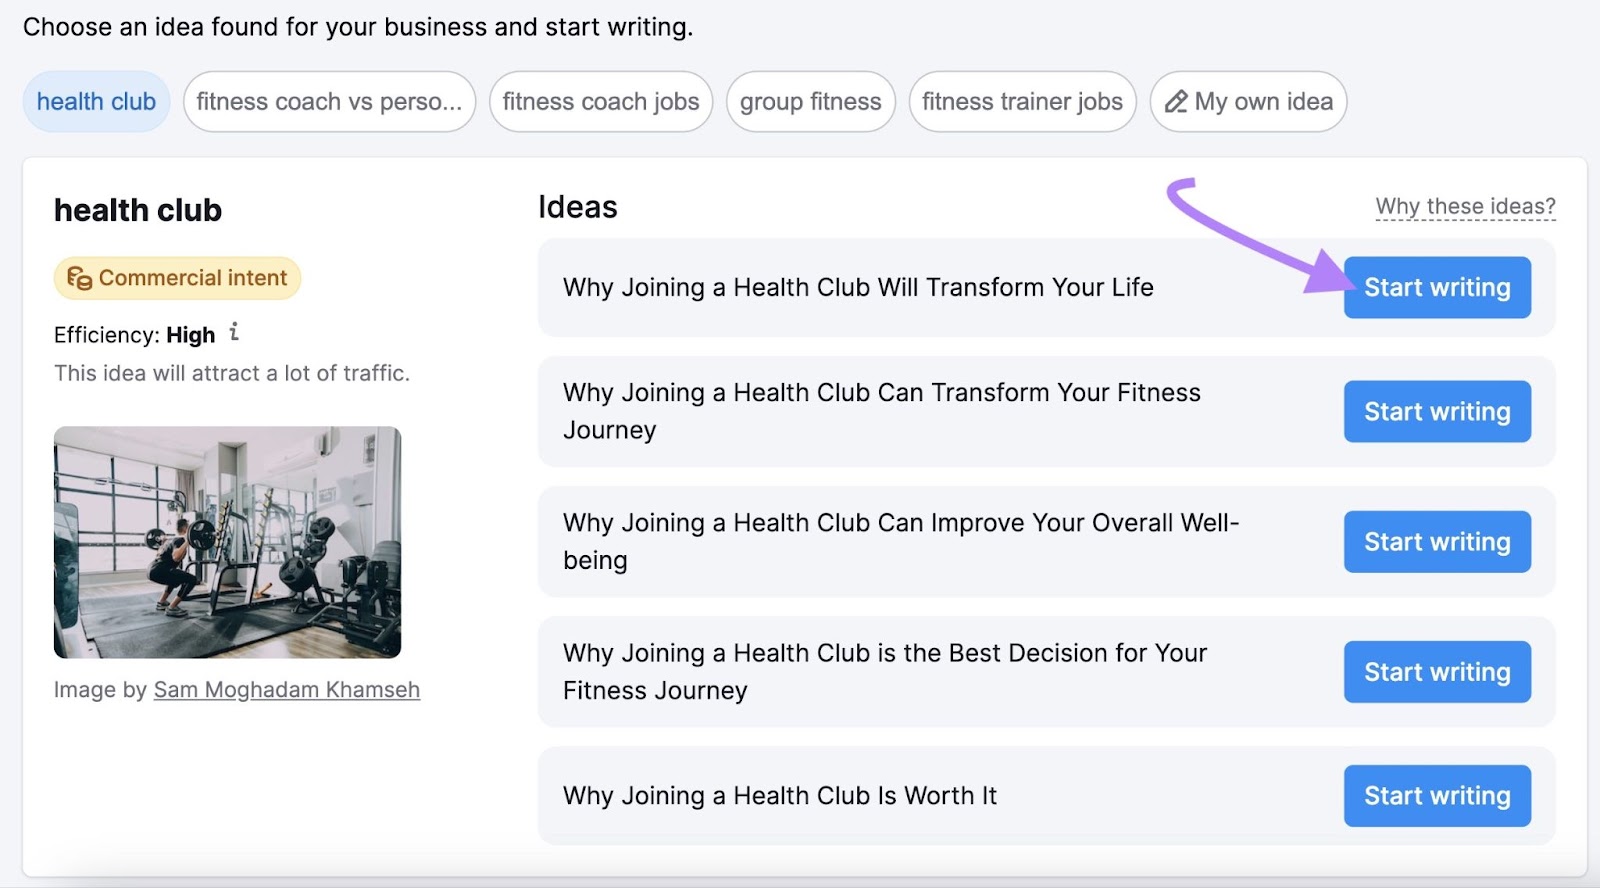 Ideas related to "health club" in ContentShake AI app